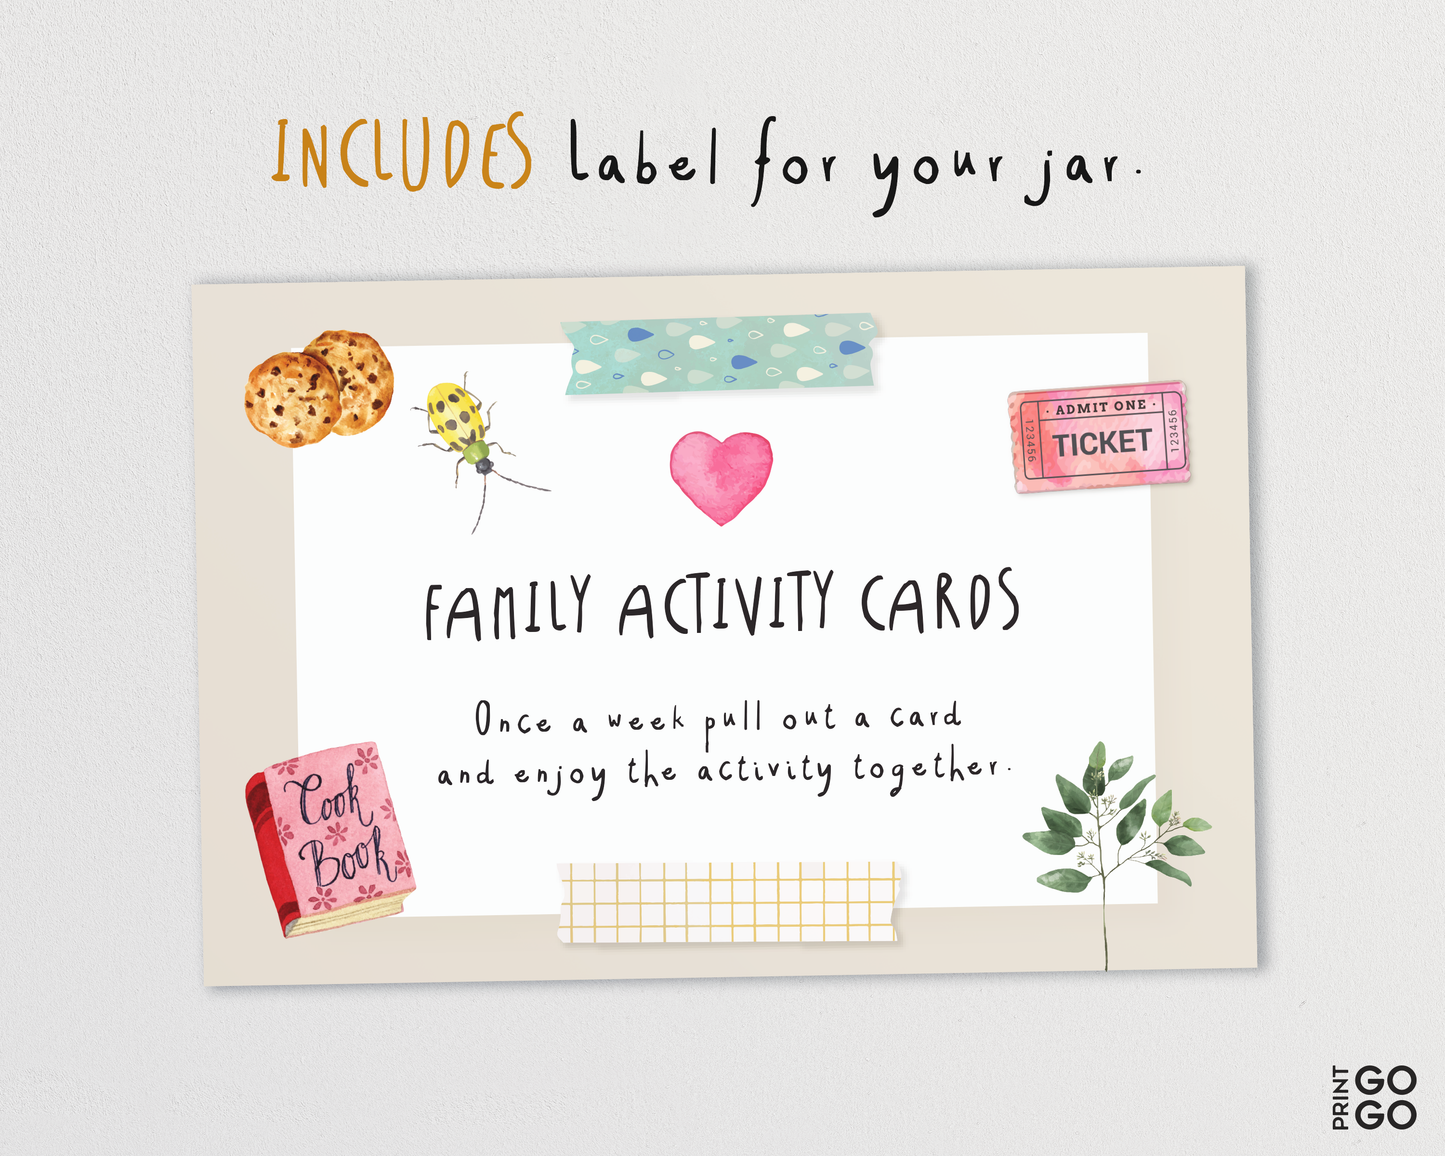 52 Family Activity Cards - Fun and Unique Weekly Activities to Keep the Whole Clan Happy | Activity Jar ideas | Budget Boredom Busters